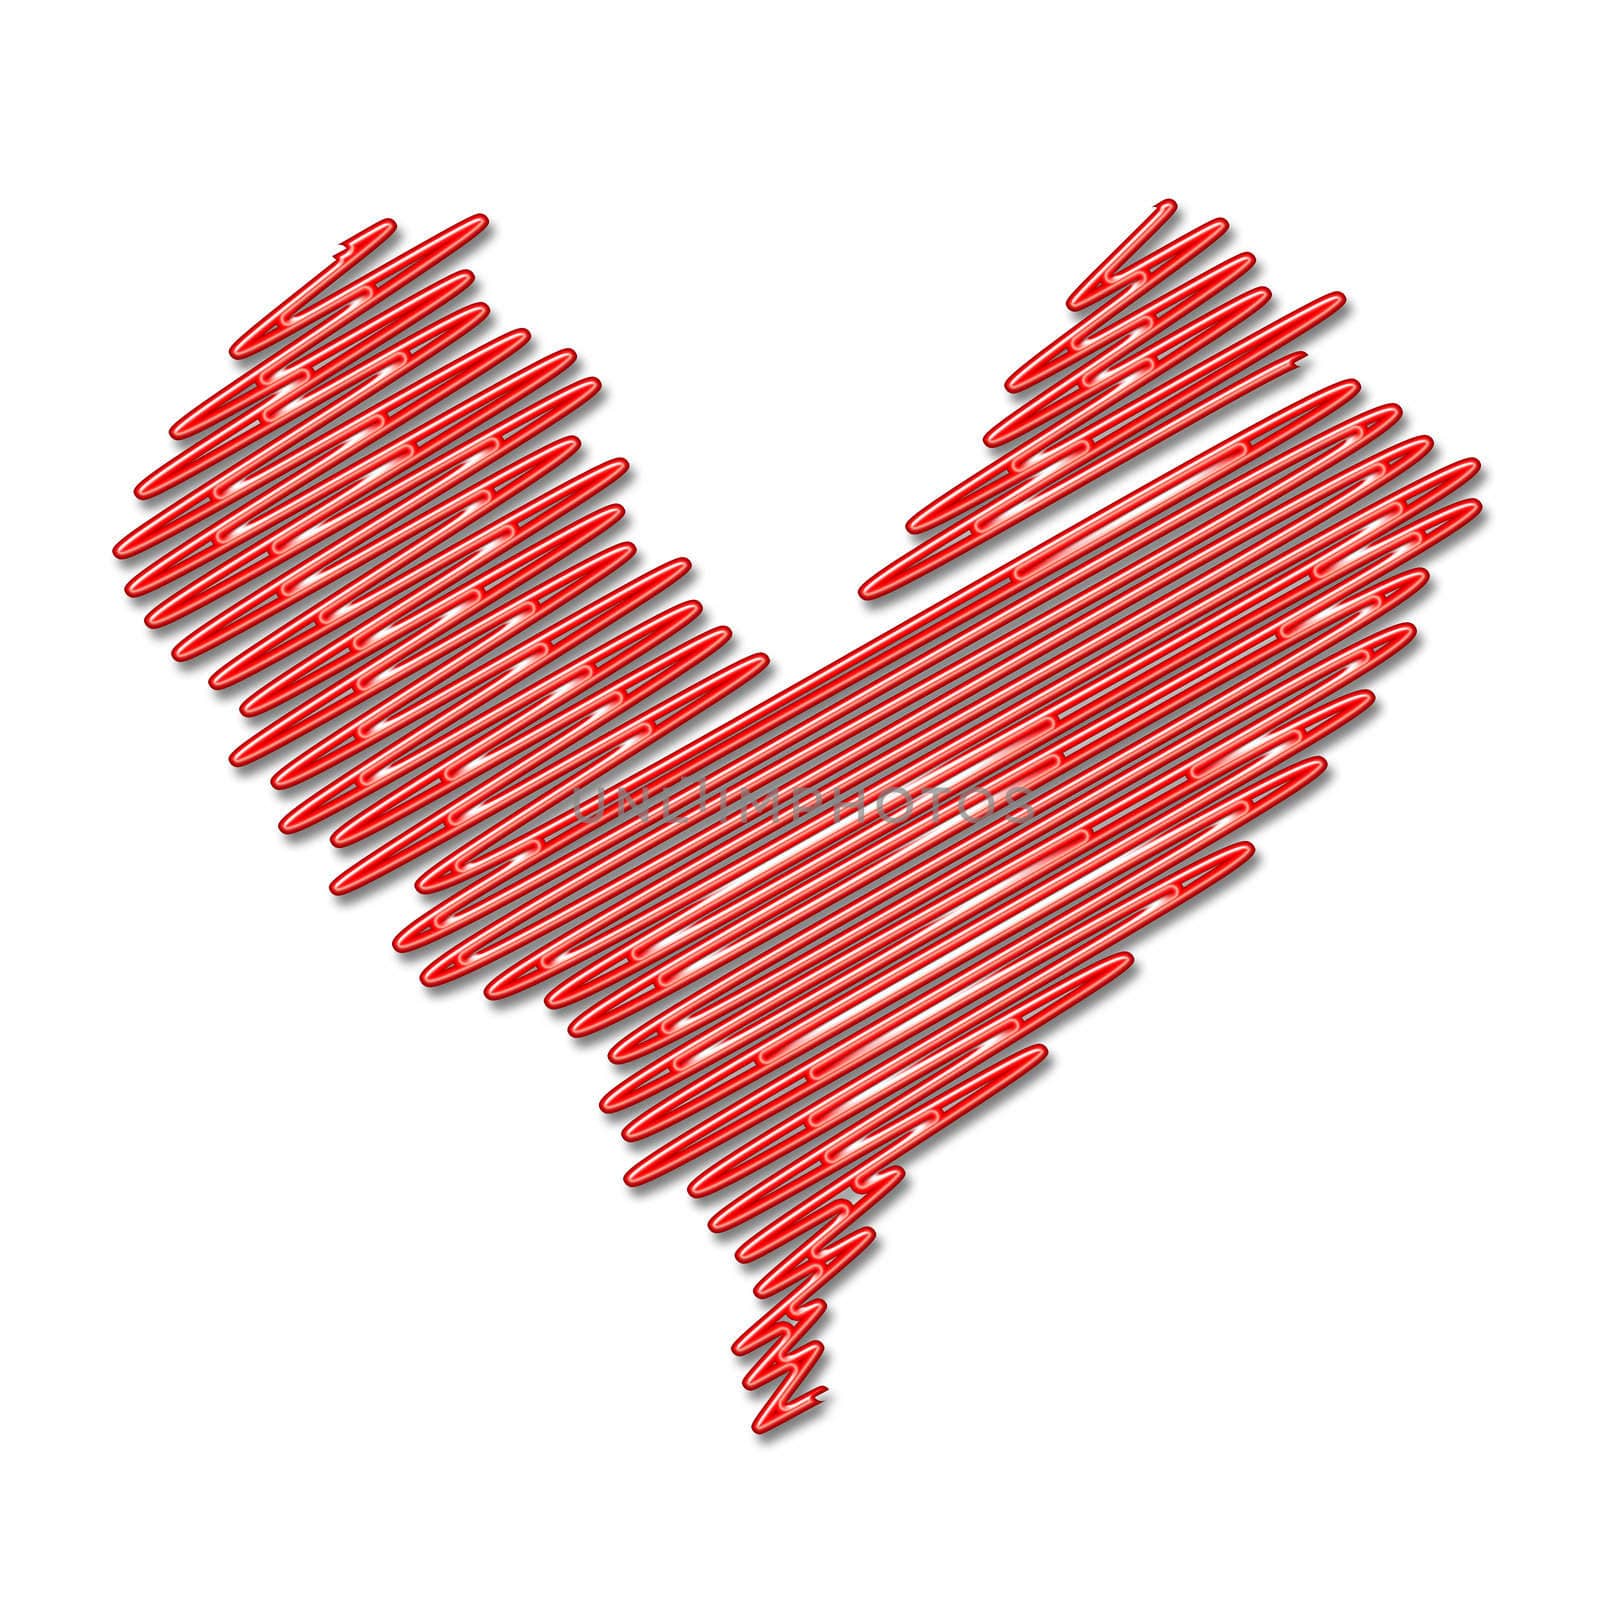 computer illustration of heart over white background